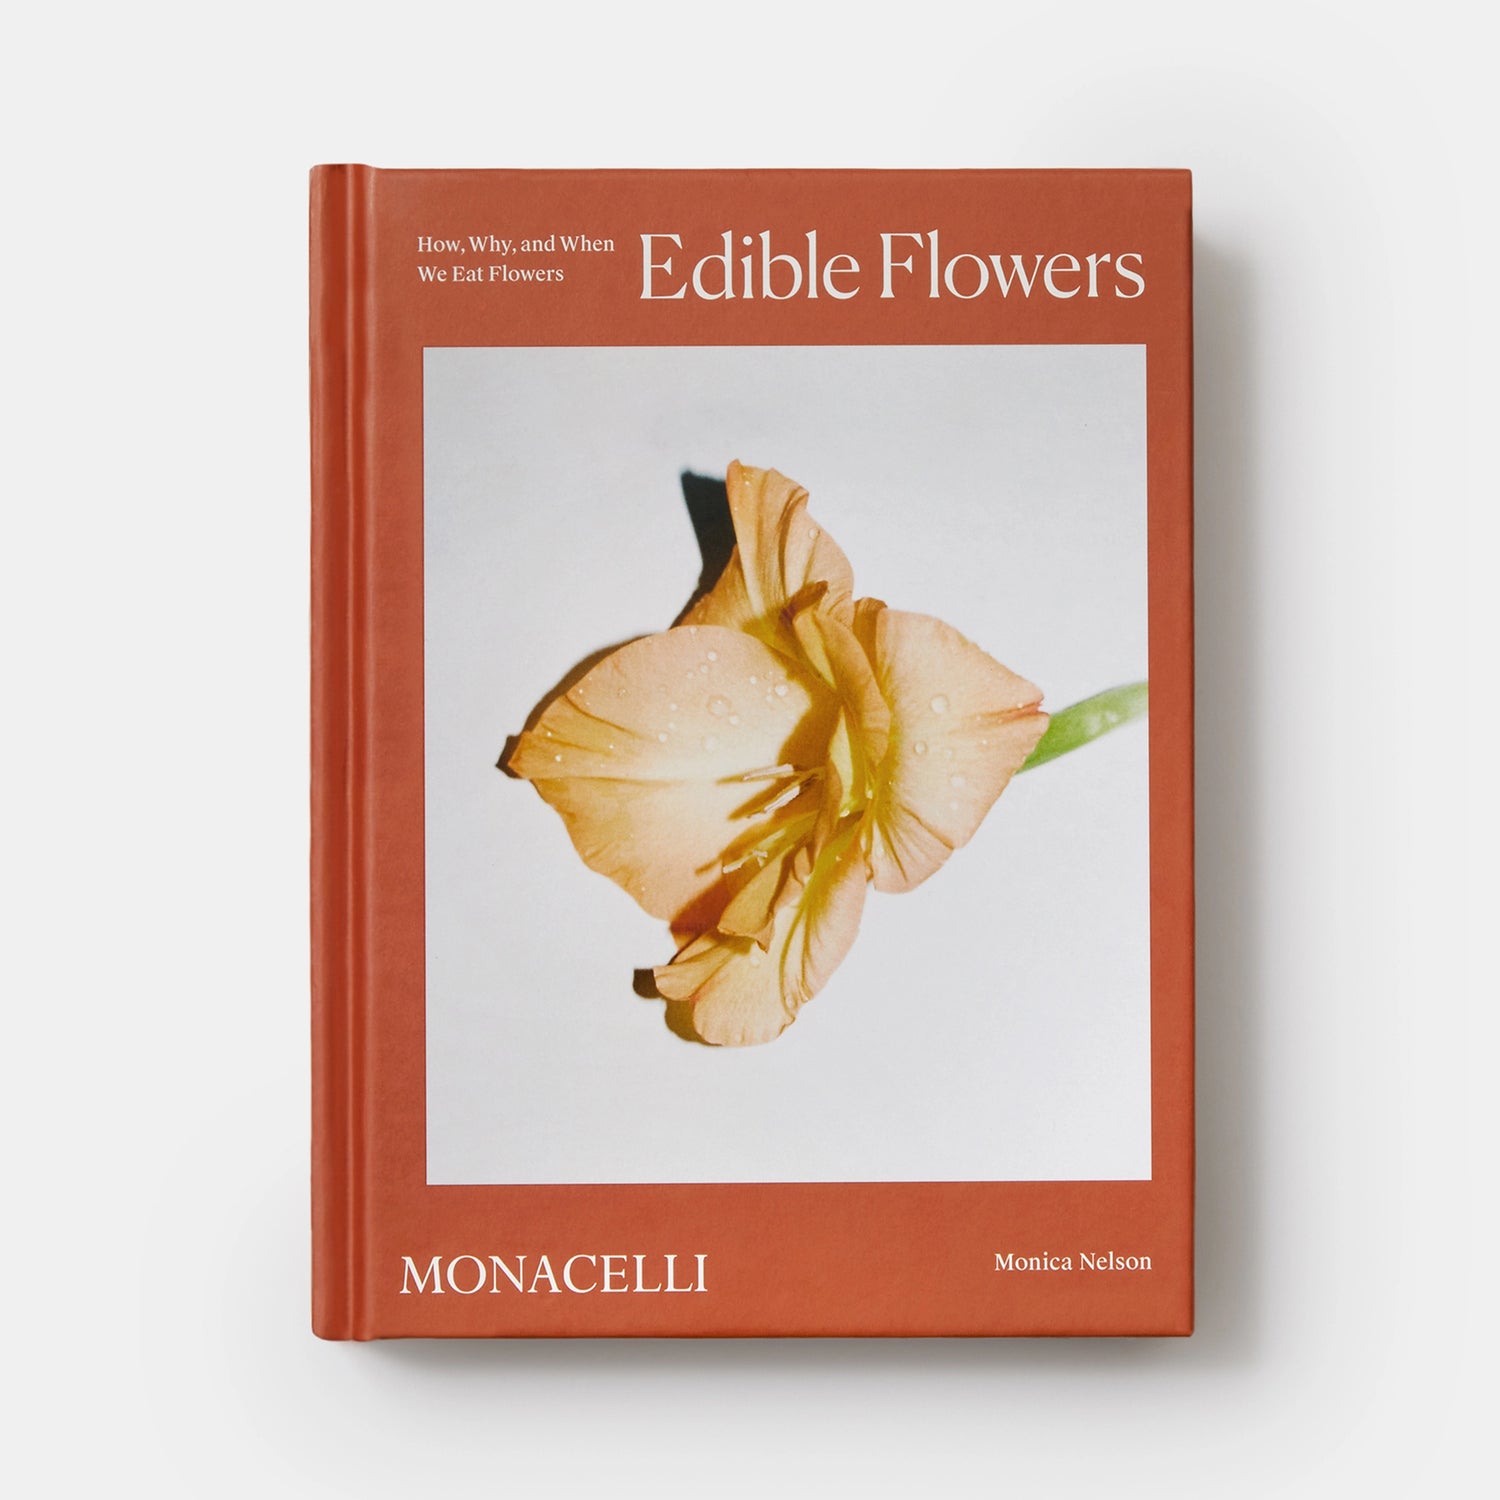  Phaidon Edible Flowers: How, Why, and When We Eat Flowers 9781580935715 The Green Thumb Club